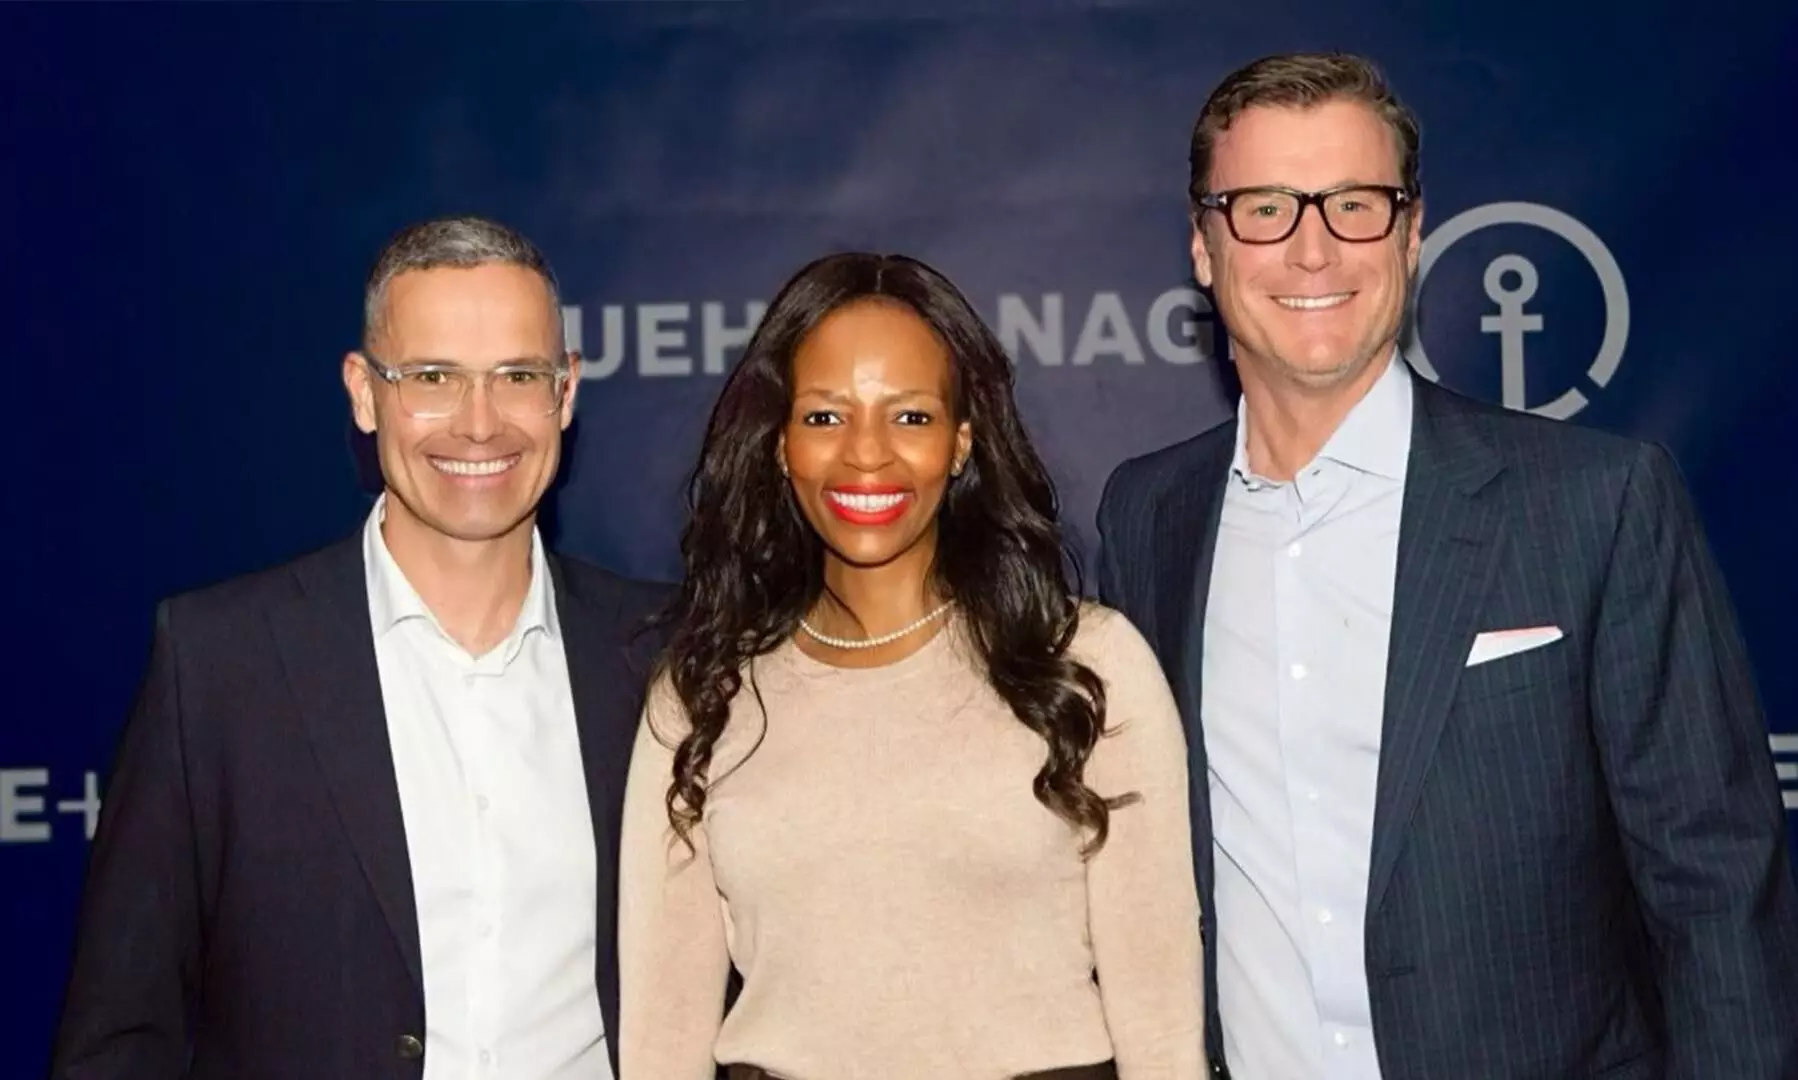 Kuehne+Nagel signs deal for new airside facility in South Africa